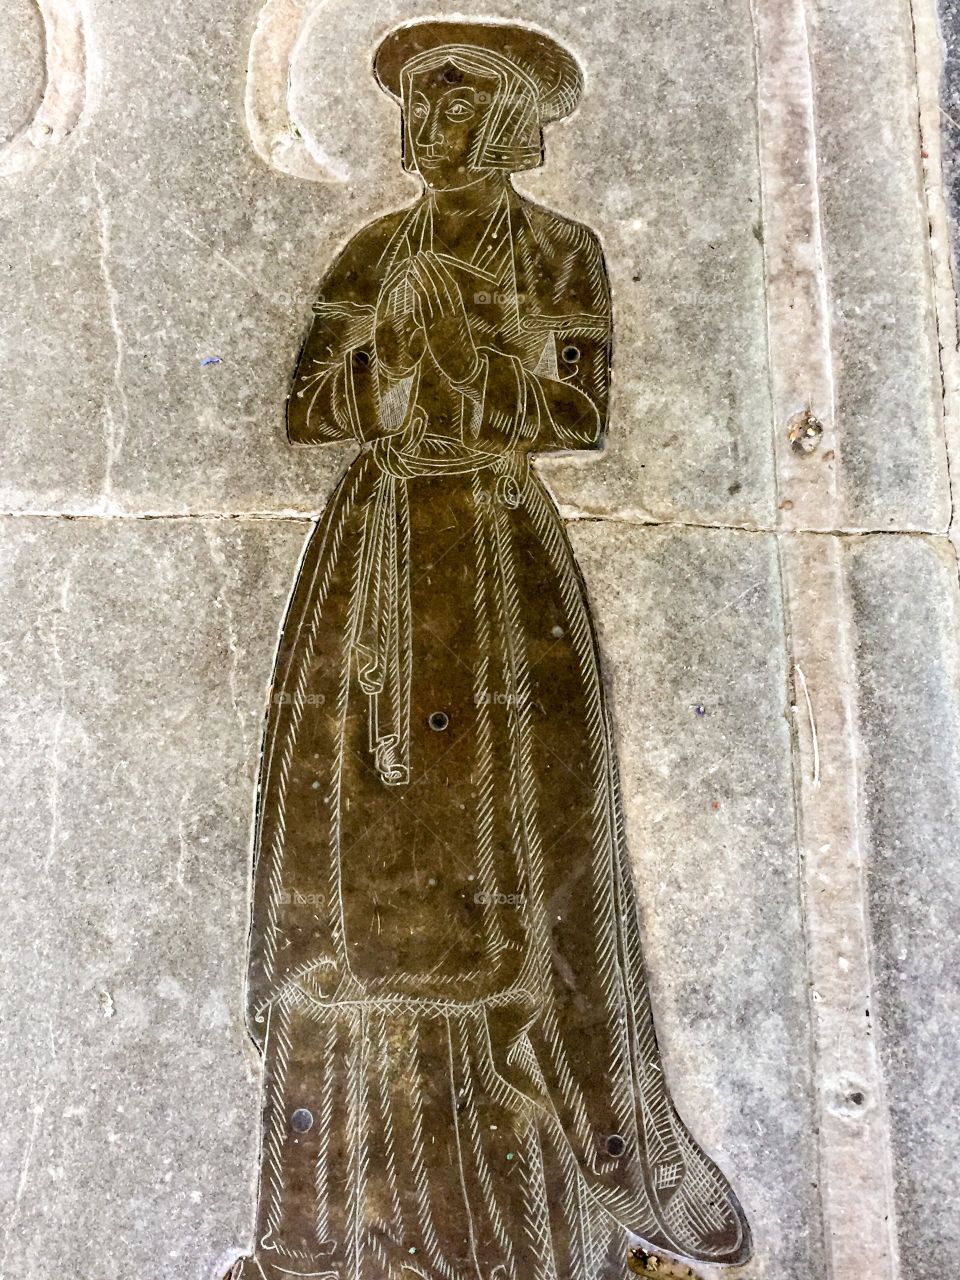 Medieval brass effigy of Joanna Peycocke, taken at Coggeshall church in Essex.